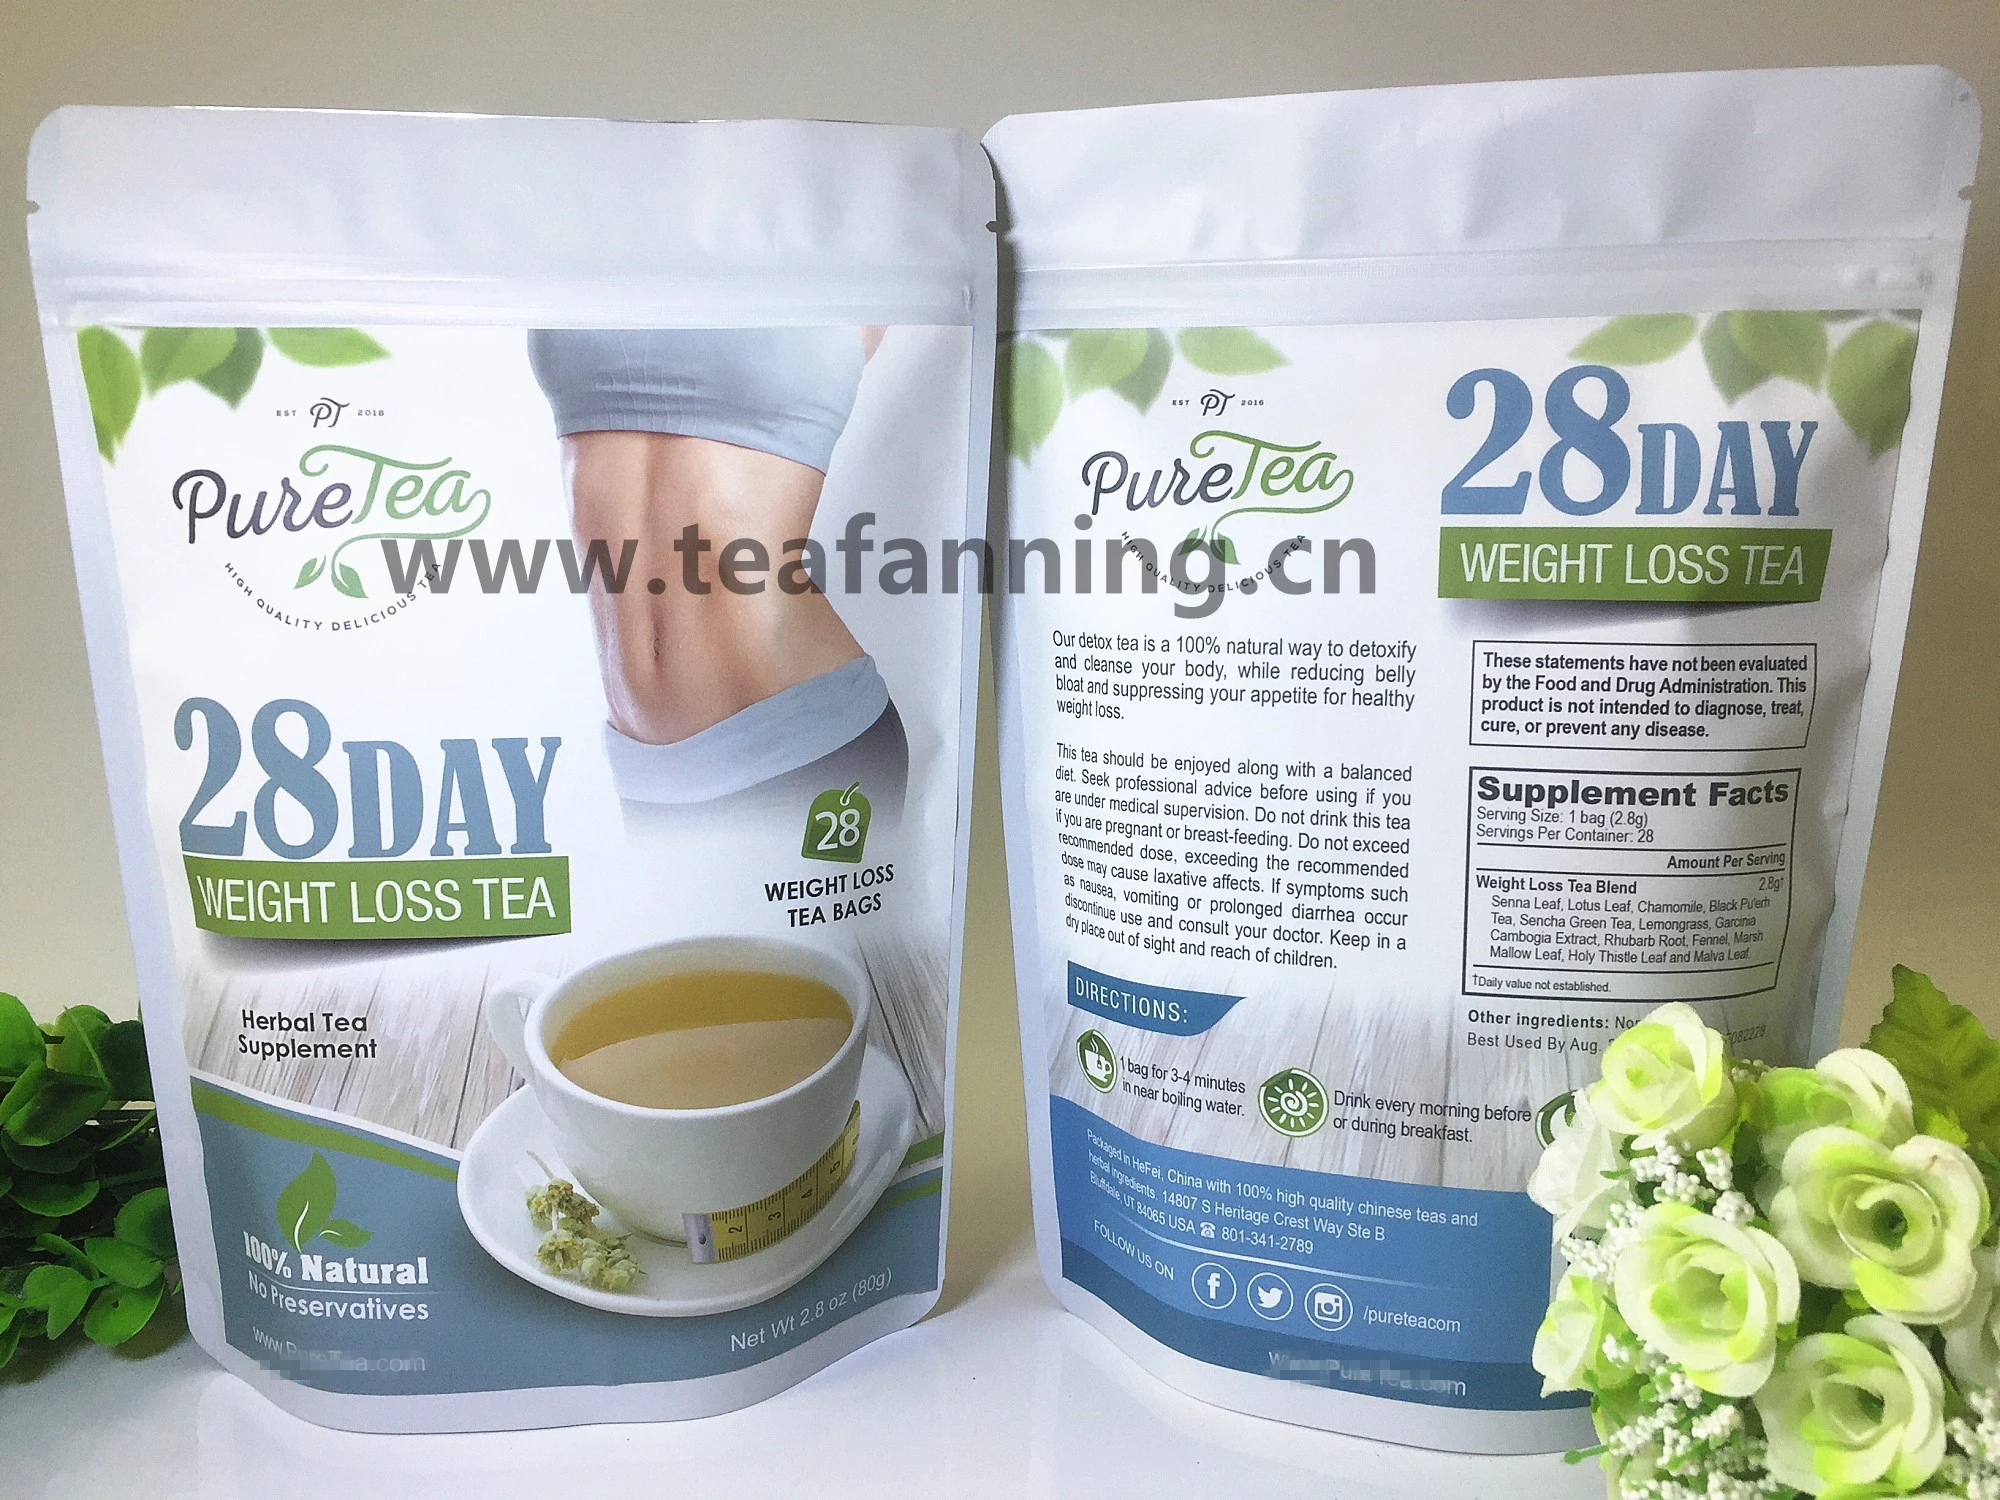 The 28 Day Lose Weight Teas with customized logo on